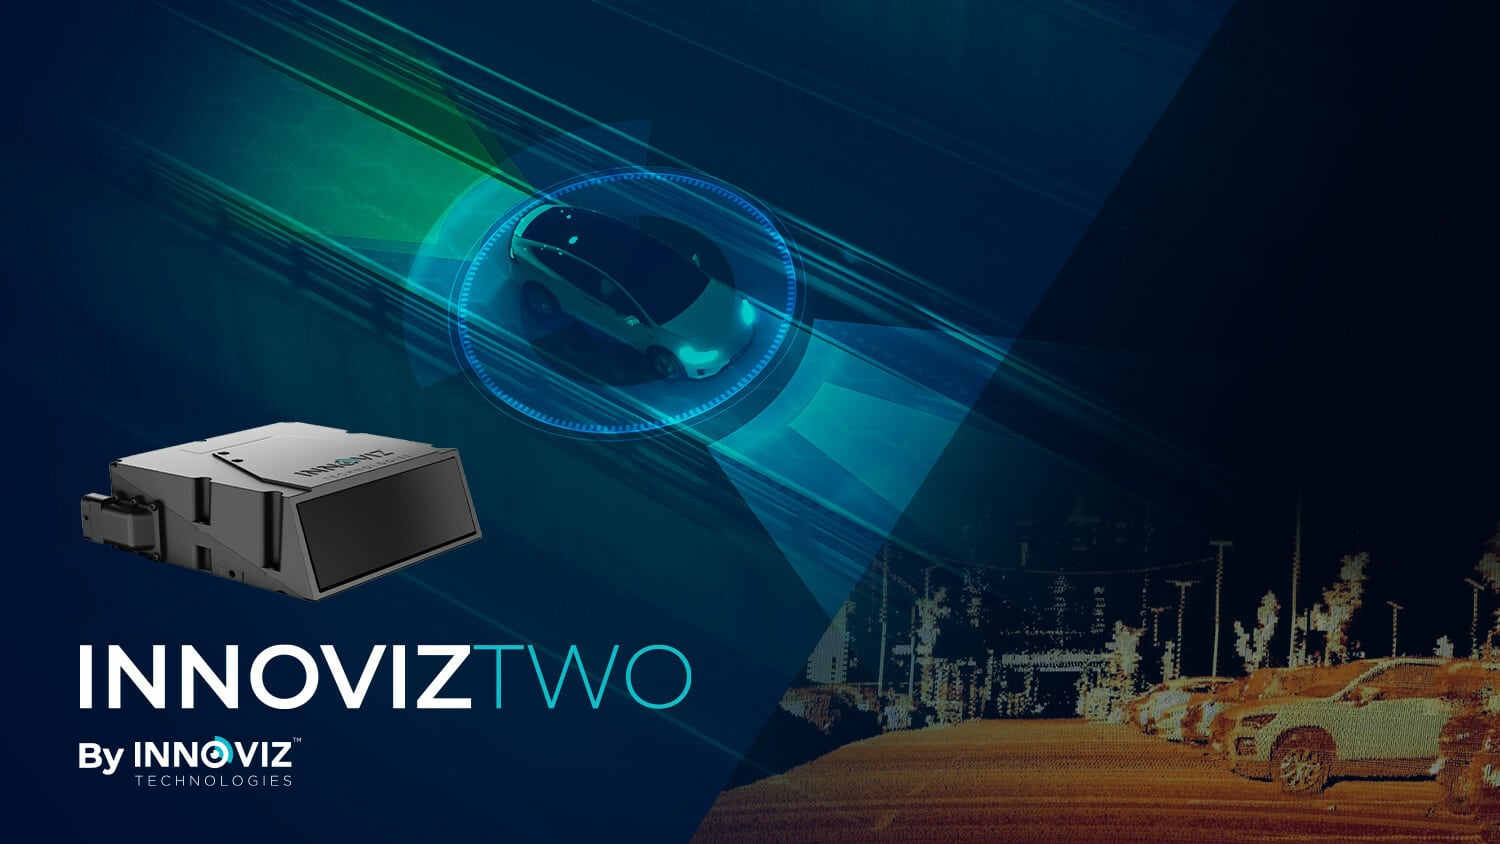 Innoviz Technologies on Track to Deliver LiDAR Technology for CARIAD's Advanced Driver Assistance Systems